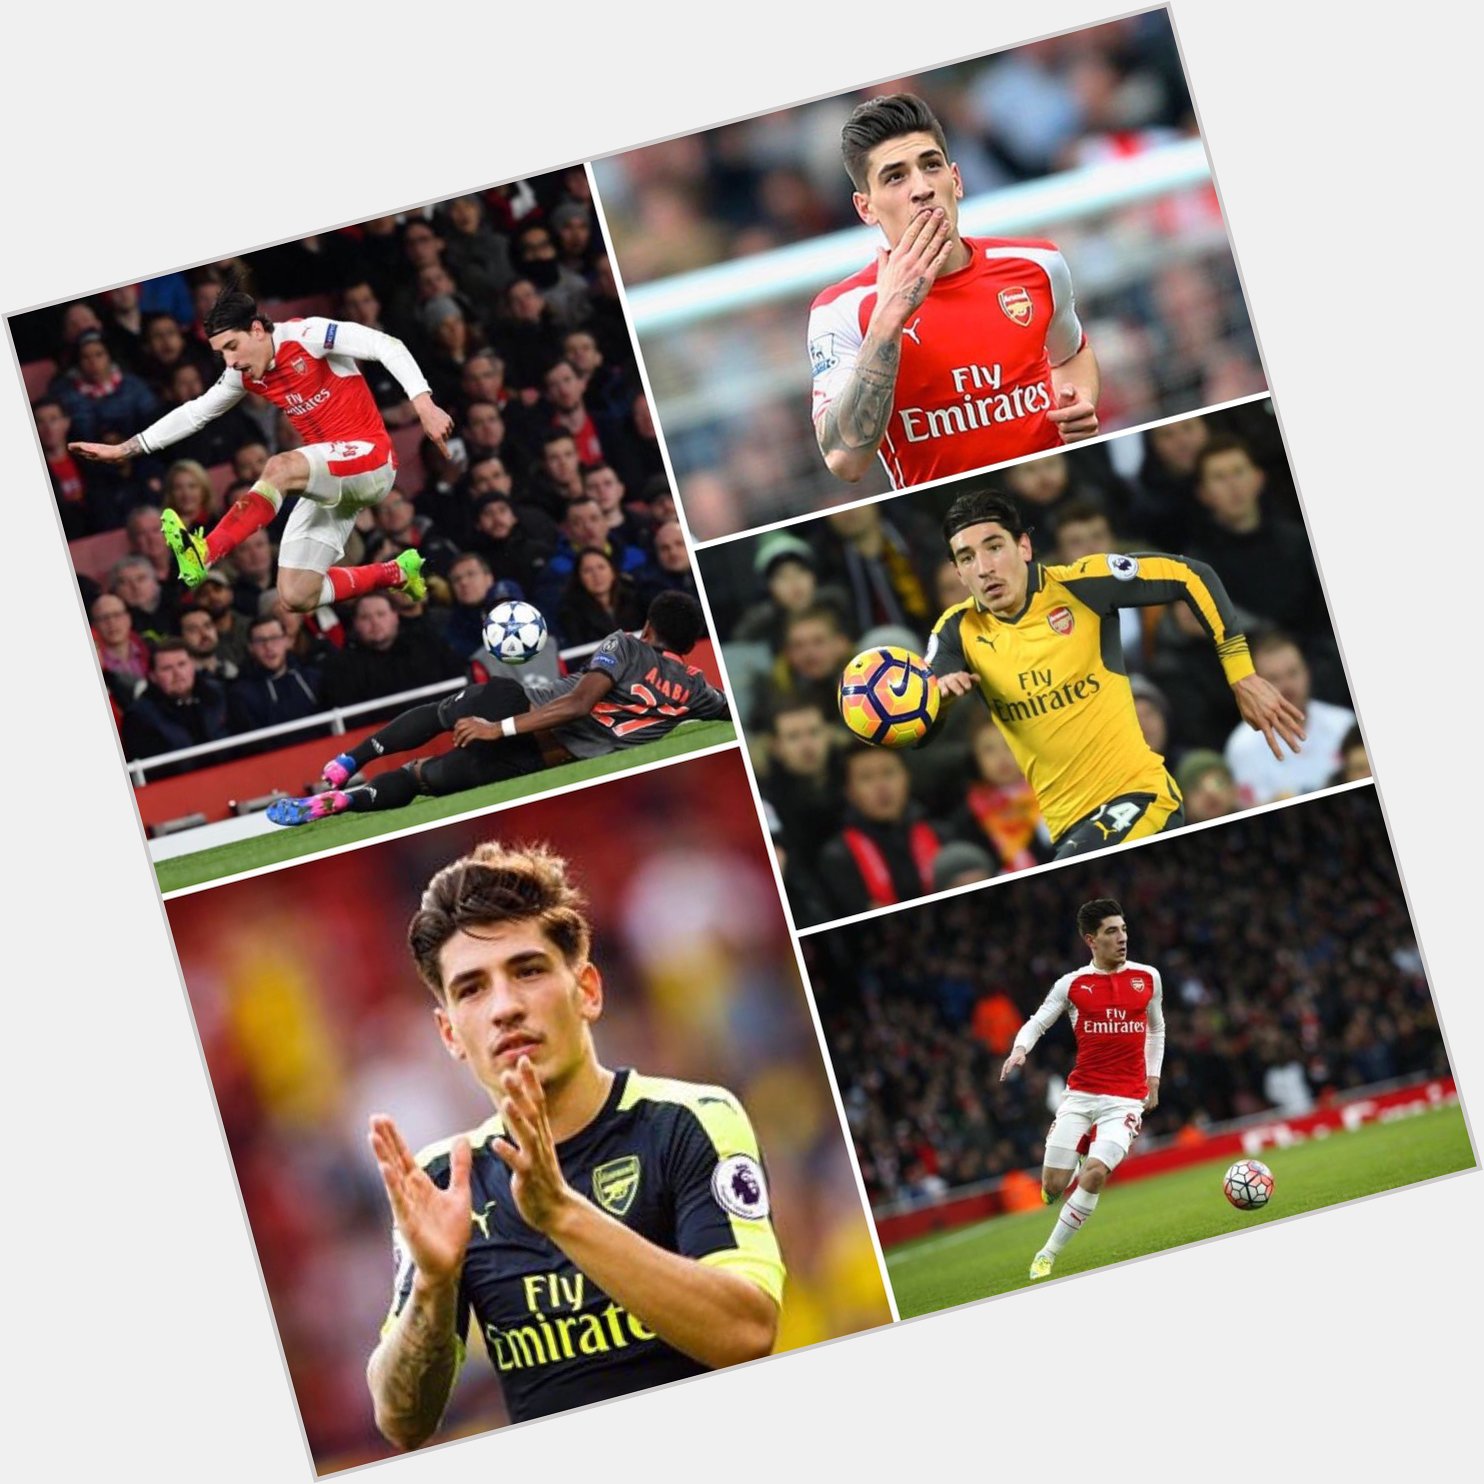 22 years old 102 appearances   3 goals  12 assists  Happy birthday to Arsenal youngster, Héctor Bellerín! 